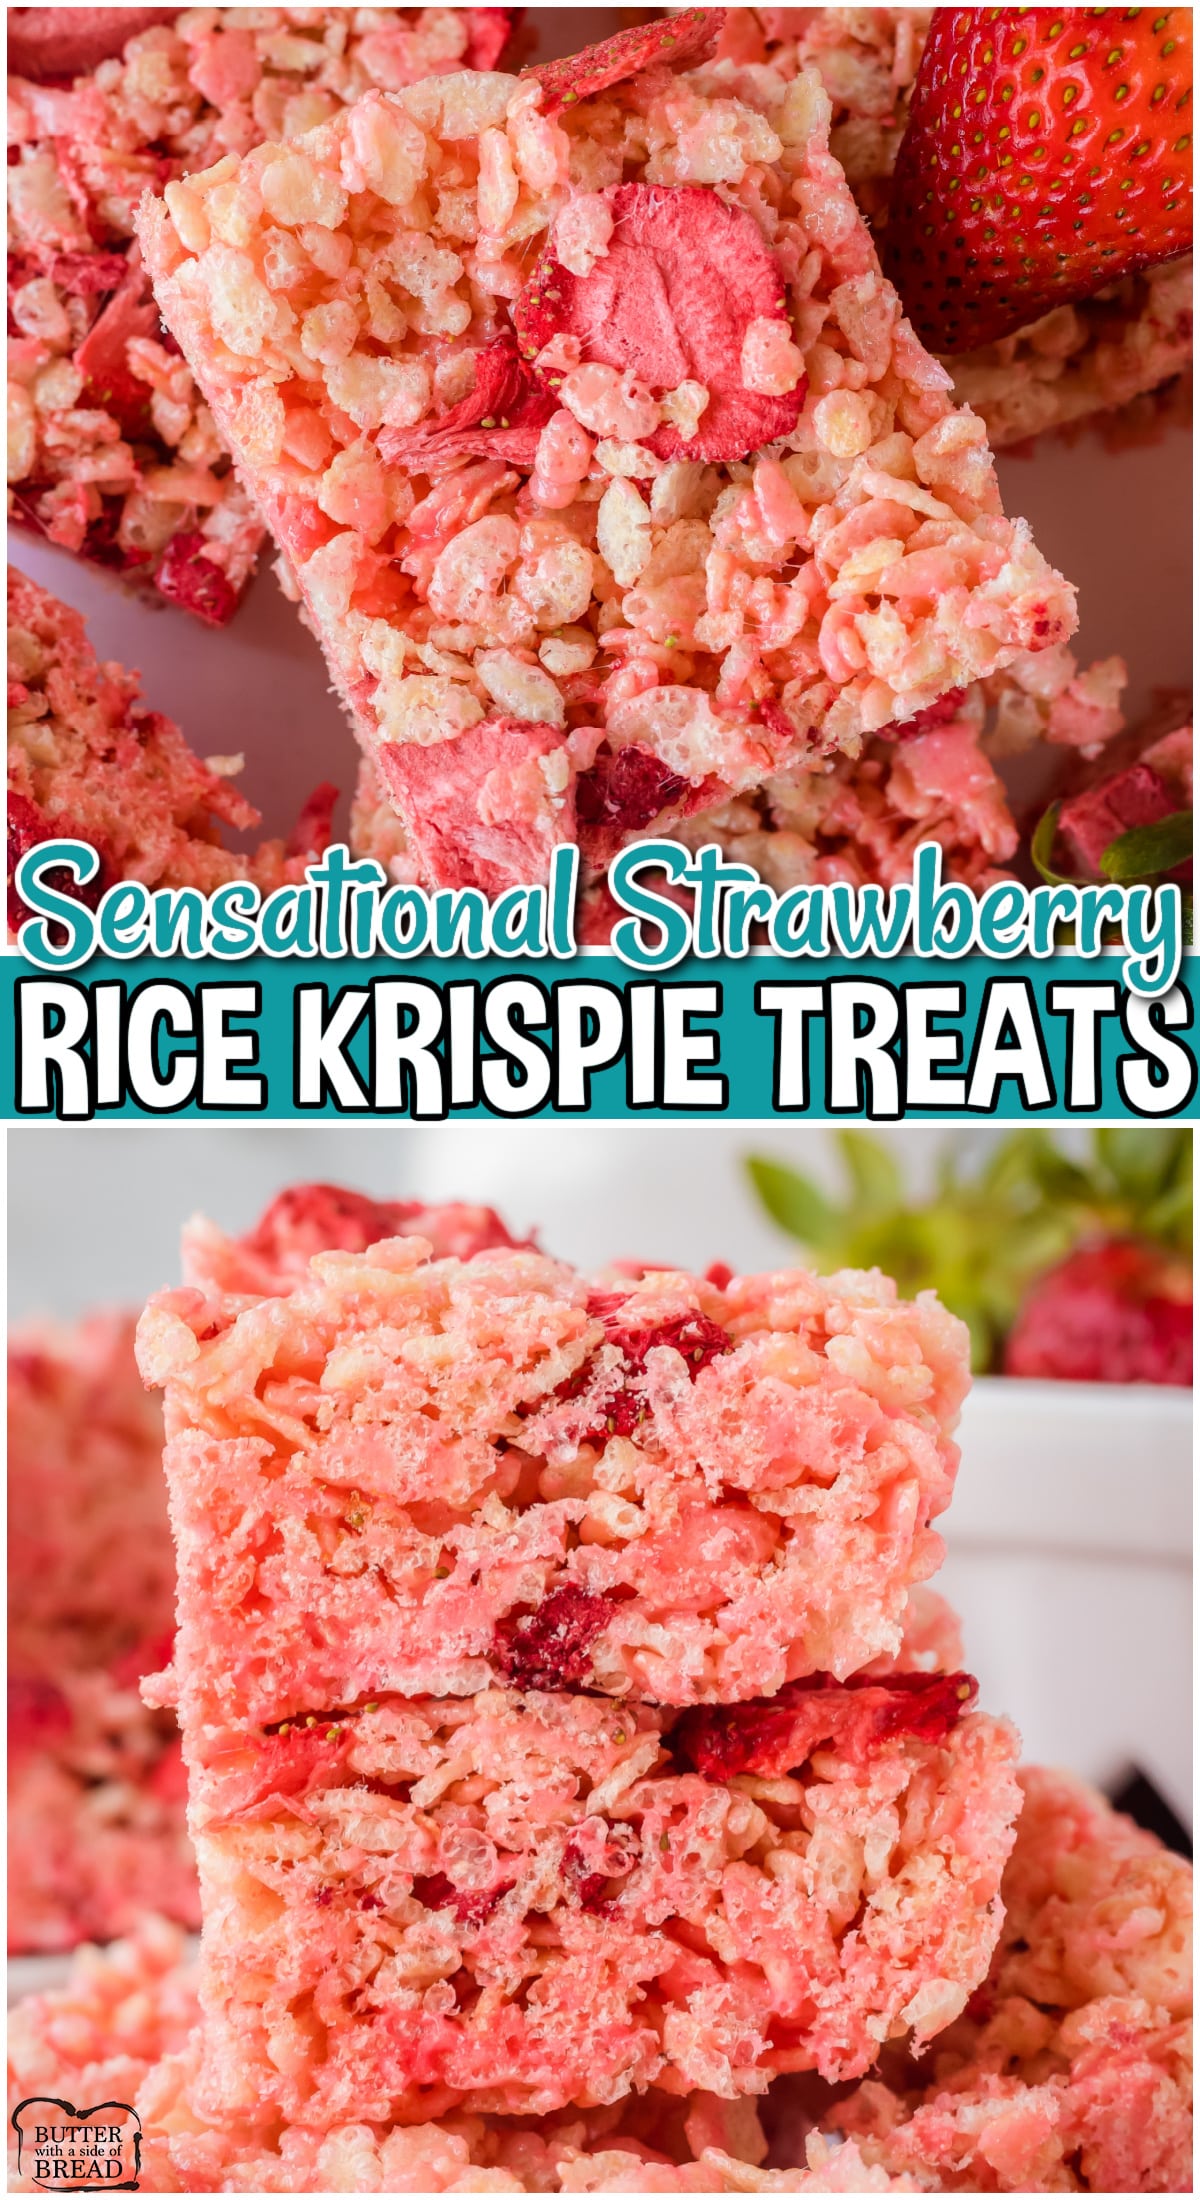 Strawberry Rice Krispie Treats made with the classic cereal, butter & marshmallows, but now with sweet strawberry added in! You'll love this pink, fruity take on traditional krispie treats!